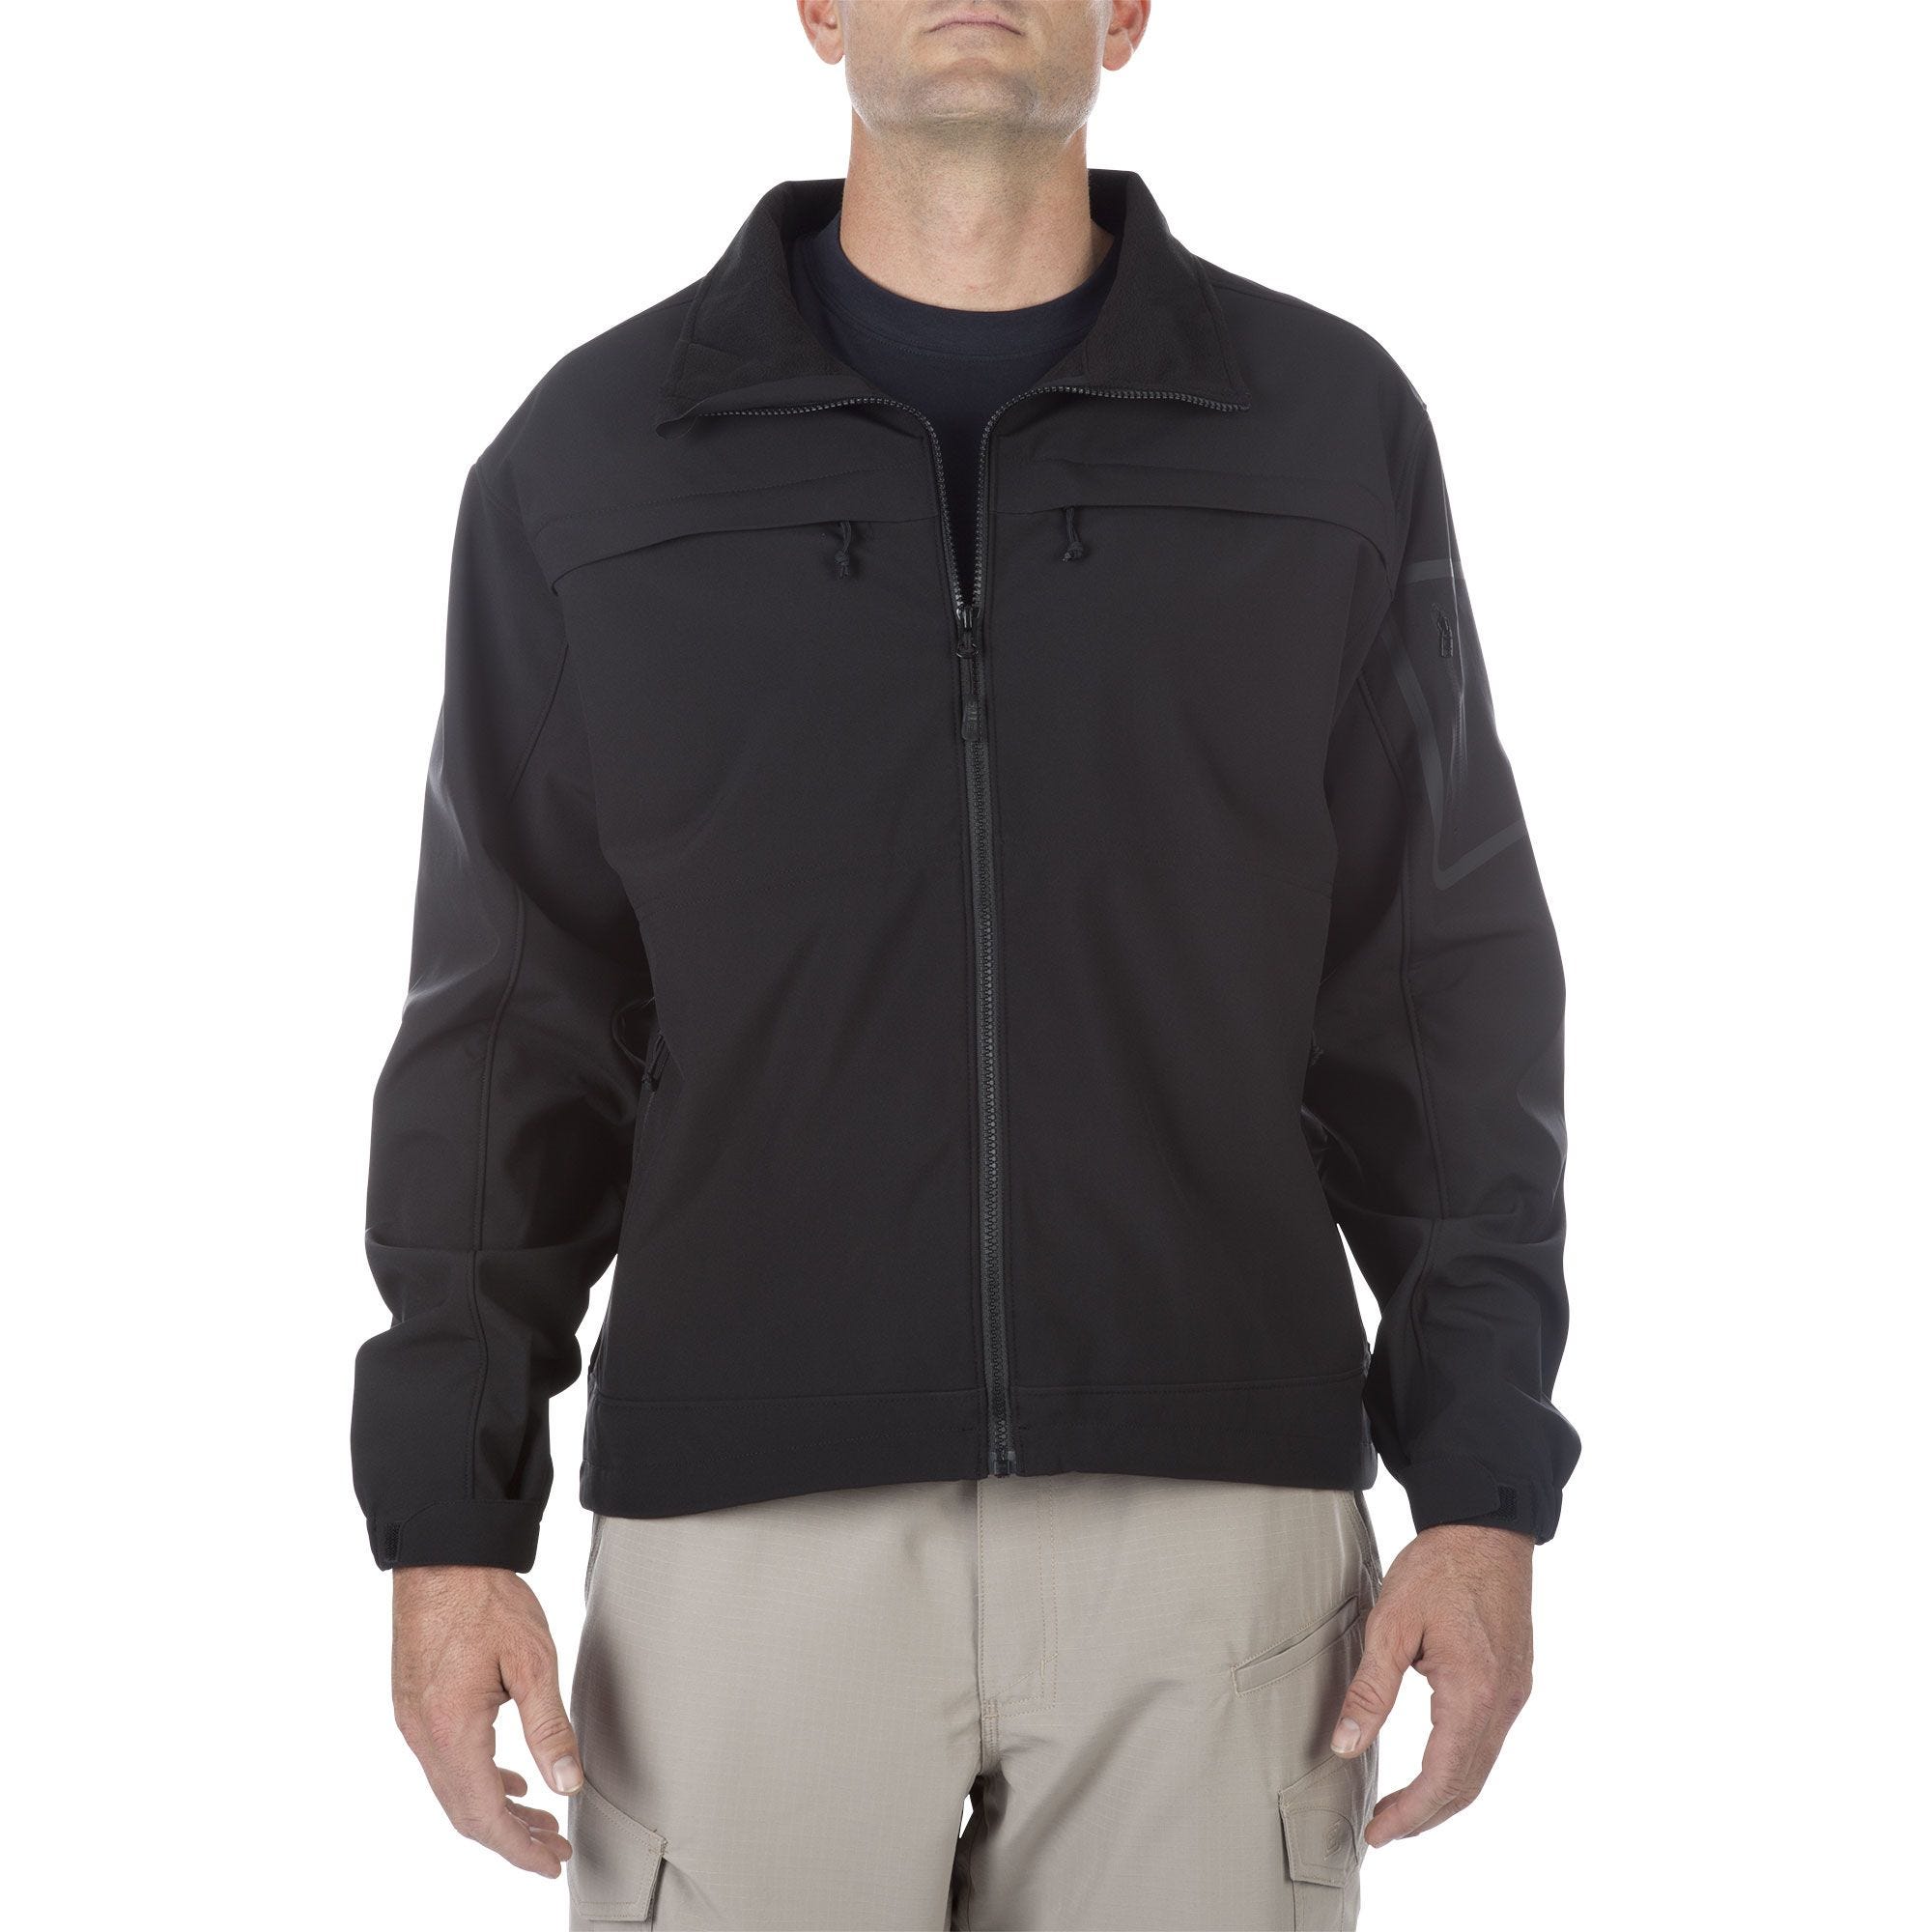 5.11 Tactical Chameleon Soft Shell Jacket | Fire and Safety